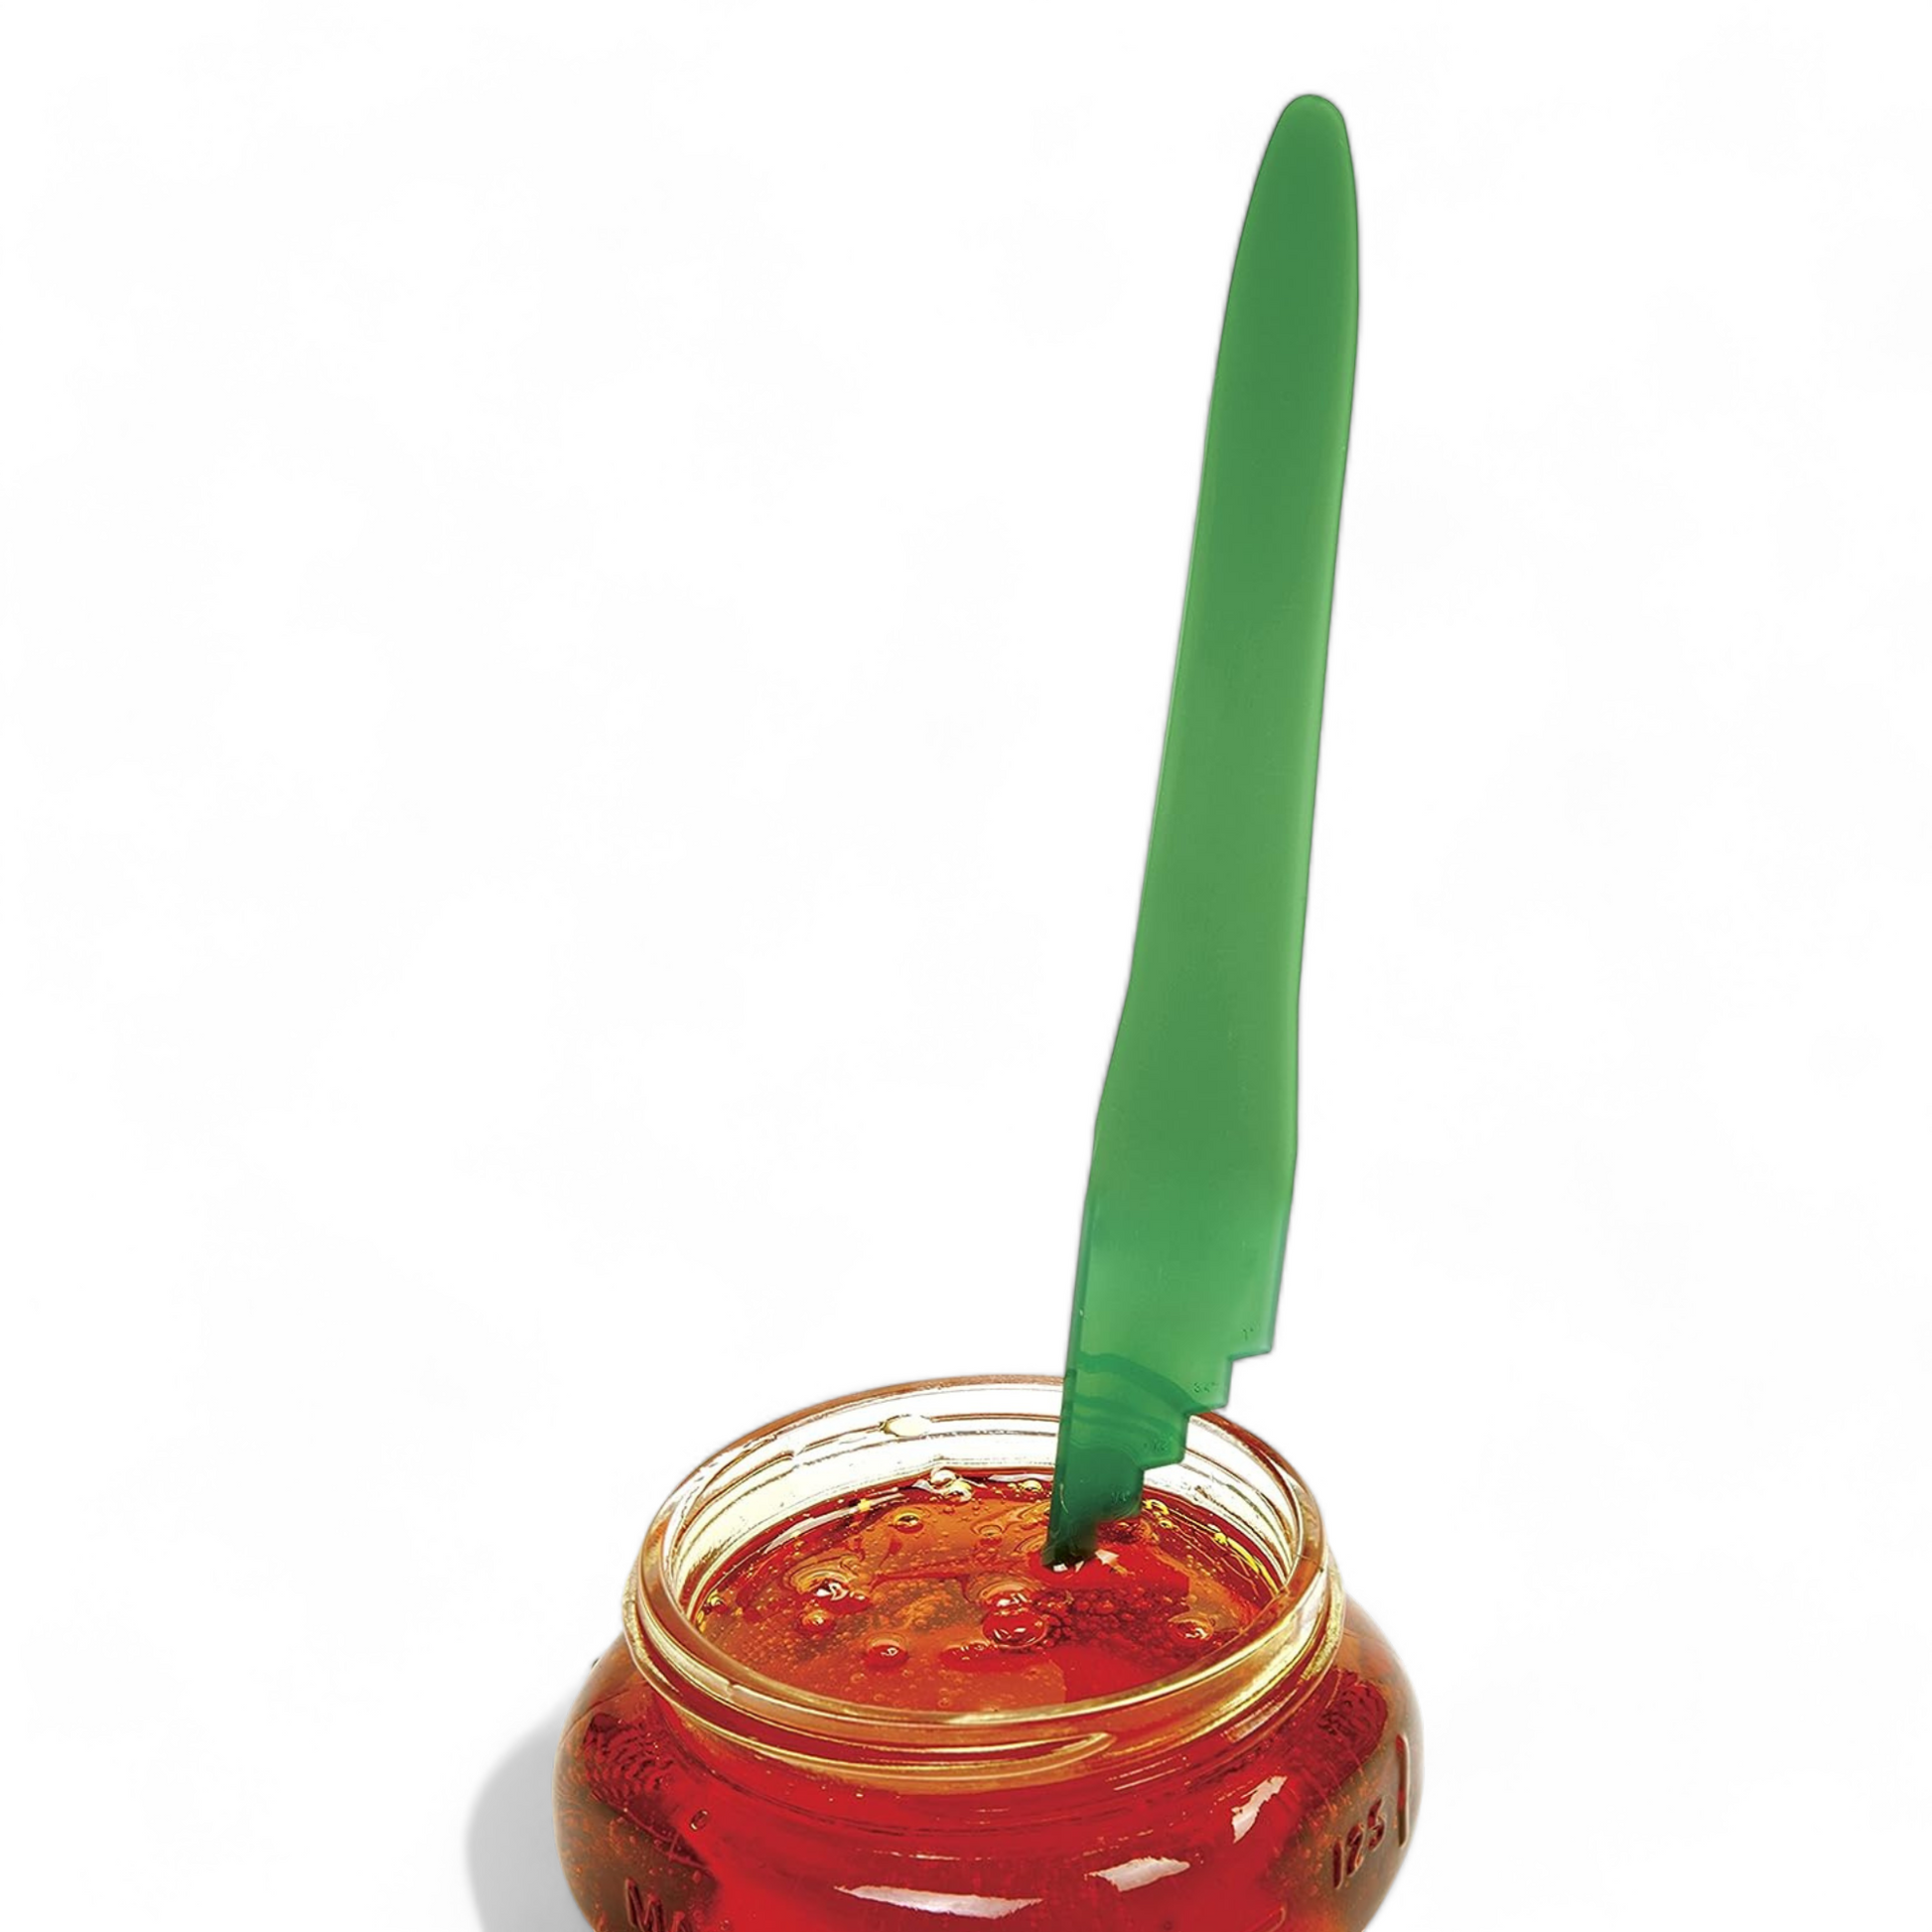 Green bubble popper measuring canning tool being used on a jar of honey